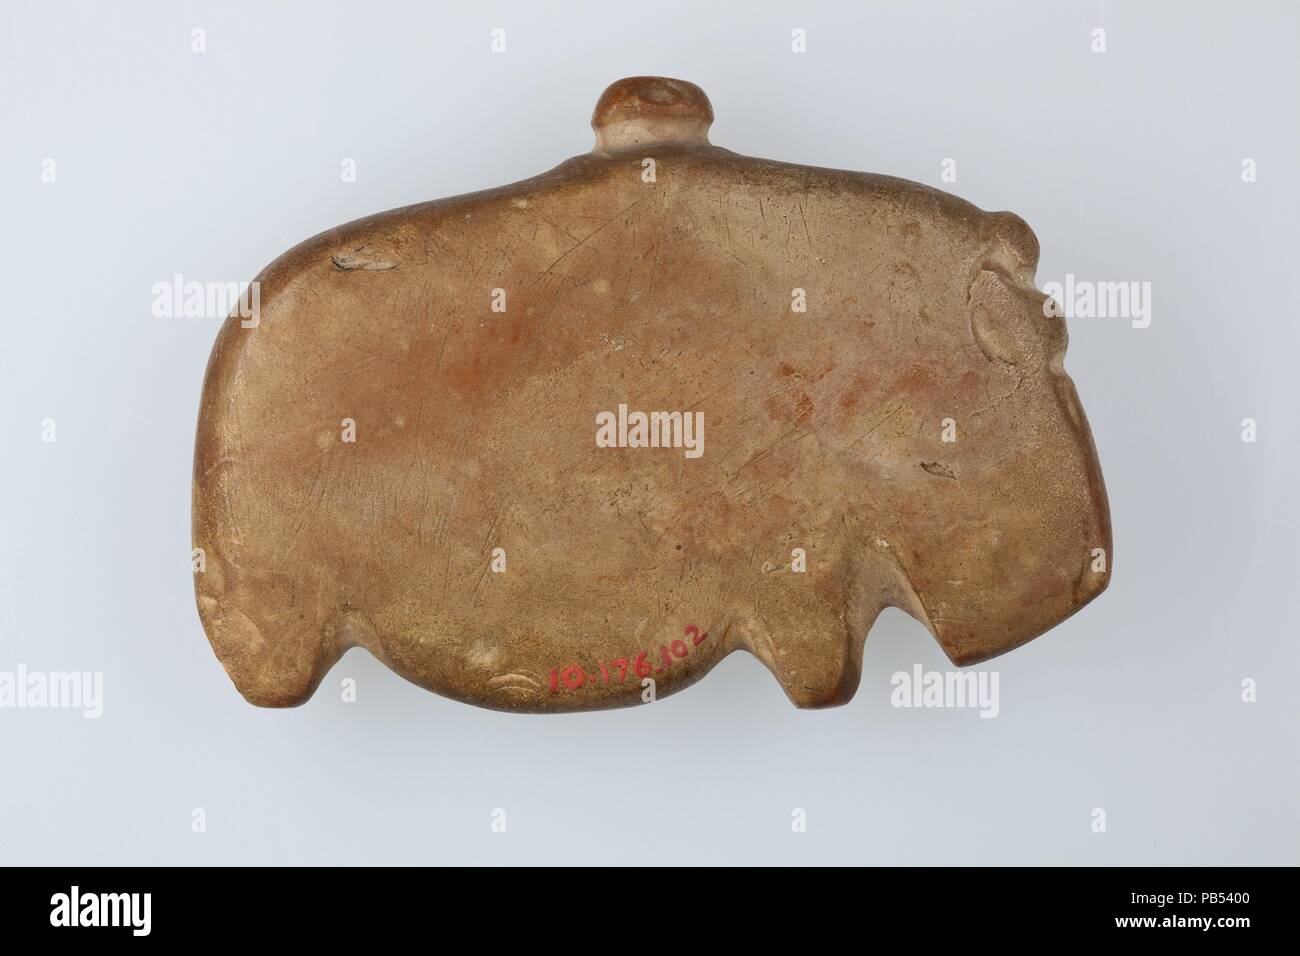 Figurine of a hippo made for suspension. Dimensions: L: 8.2 cm (3 1/4 in.); H: 5.7 cm (2 3/16 in.); W: 1.7cm (11/16 in.). Date: ca. 3650-3100 B.C.. Museum: Metropolitan Museum of Art, New York, USA. Stock Photo